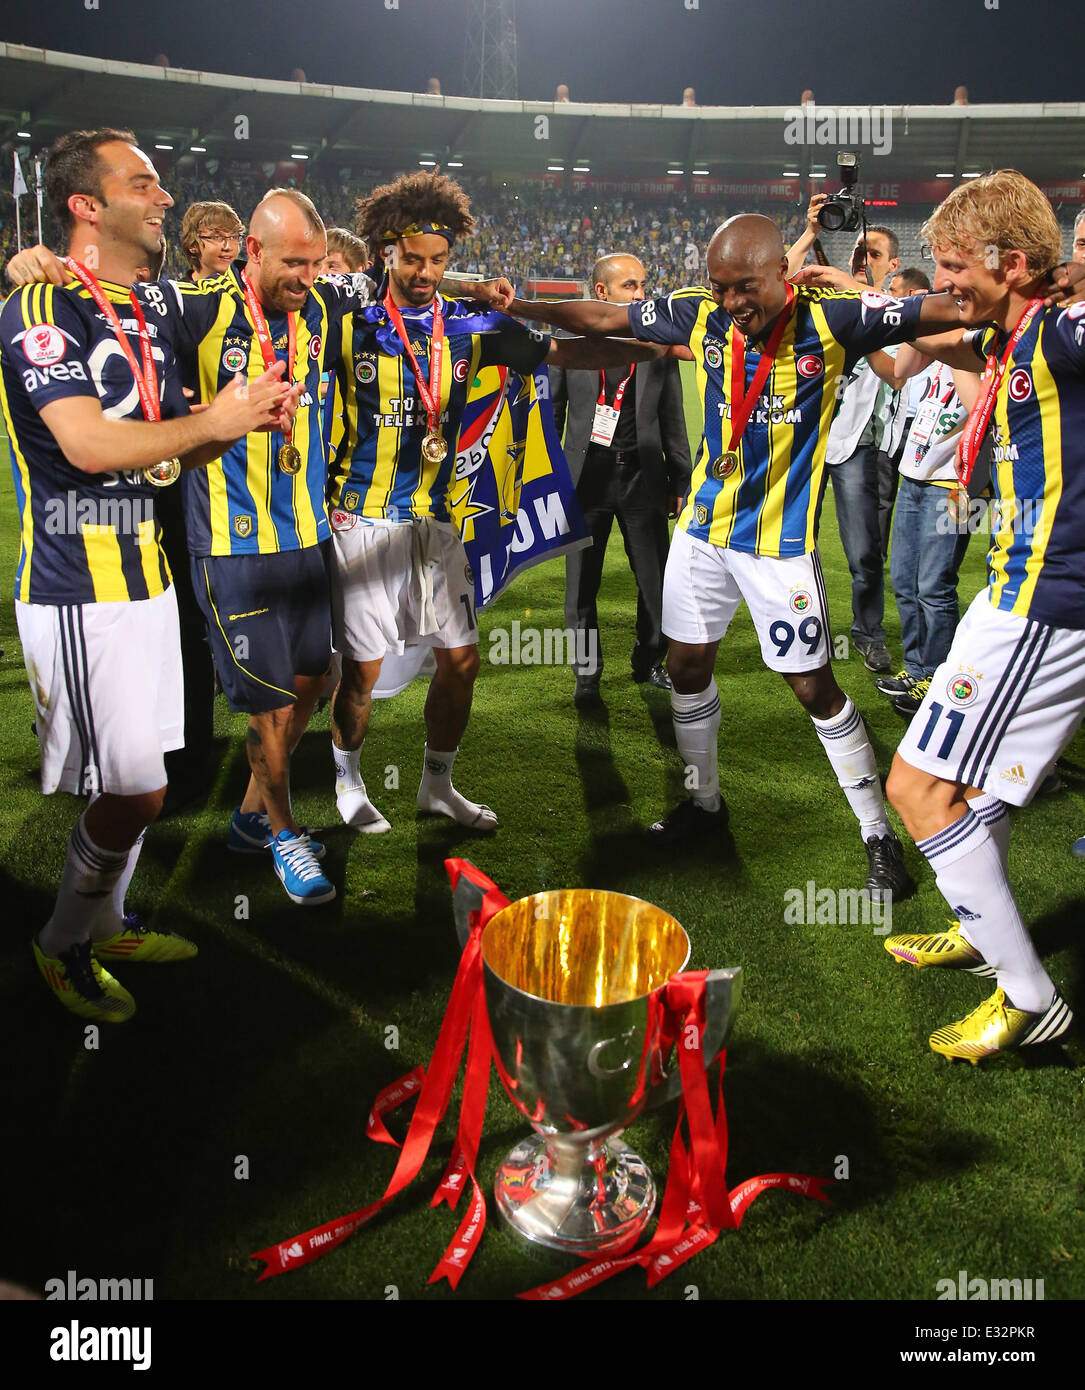 Fenerbahce players celebrate after winning the Ziraat Turkish Cup final  match between Fenerbahce ( yellow) and Trabzonspor ( blue) at 19 Mayis  Stadium in Ankara, Turkey Match Score: Fenerbahce 1 - Trabzonspor